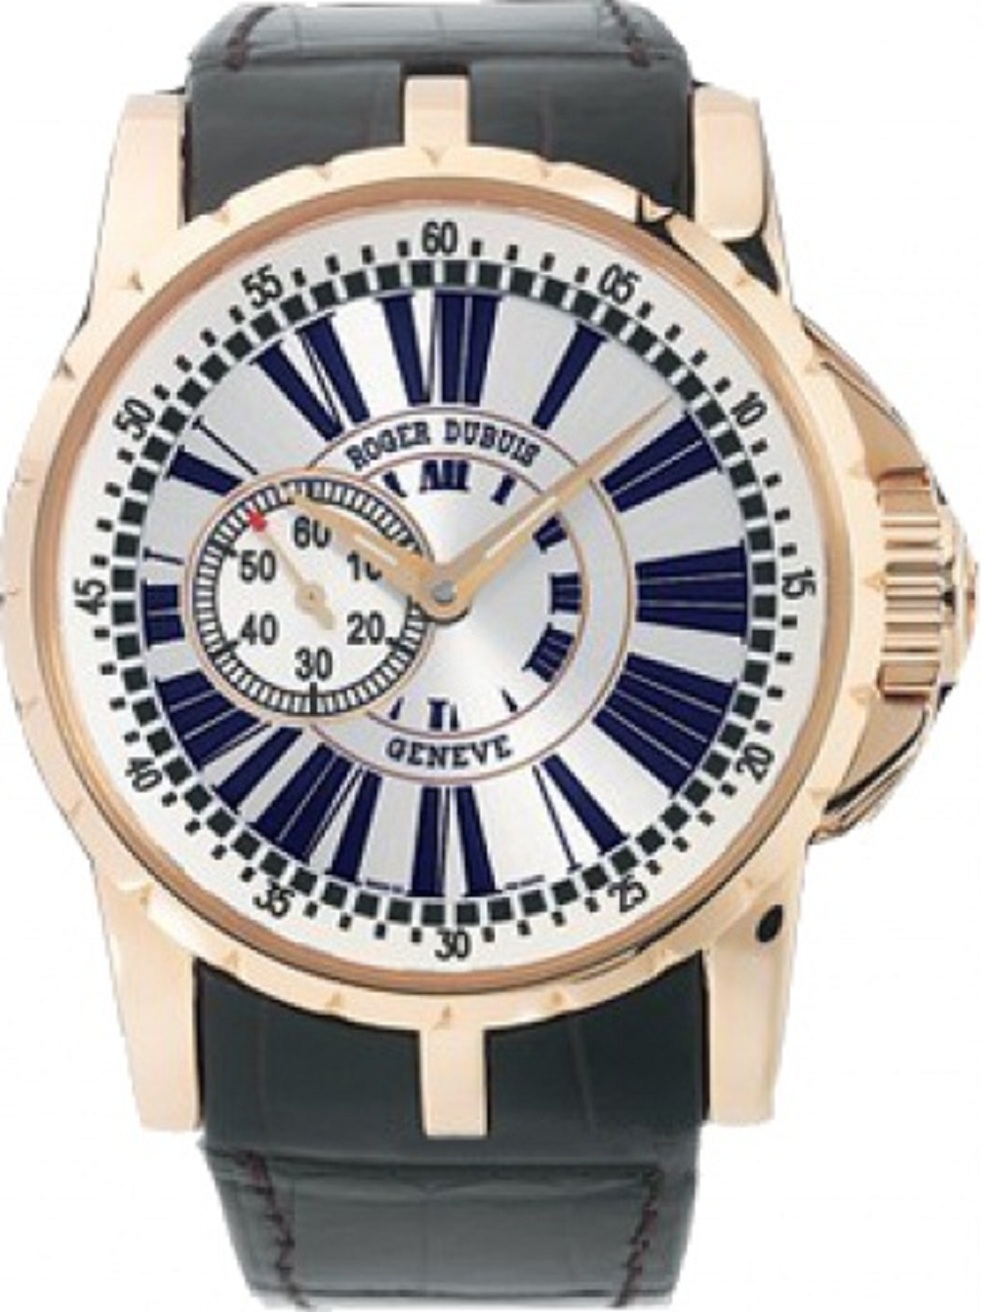 Roger Dubuis Excalibur Automatic 45mm in Rose Gold - Limited Edition 28pcs.